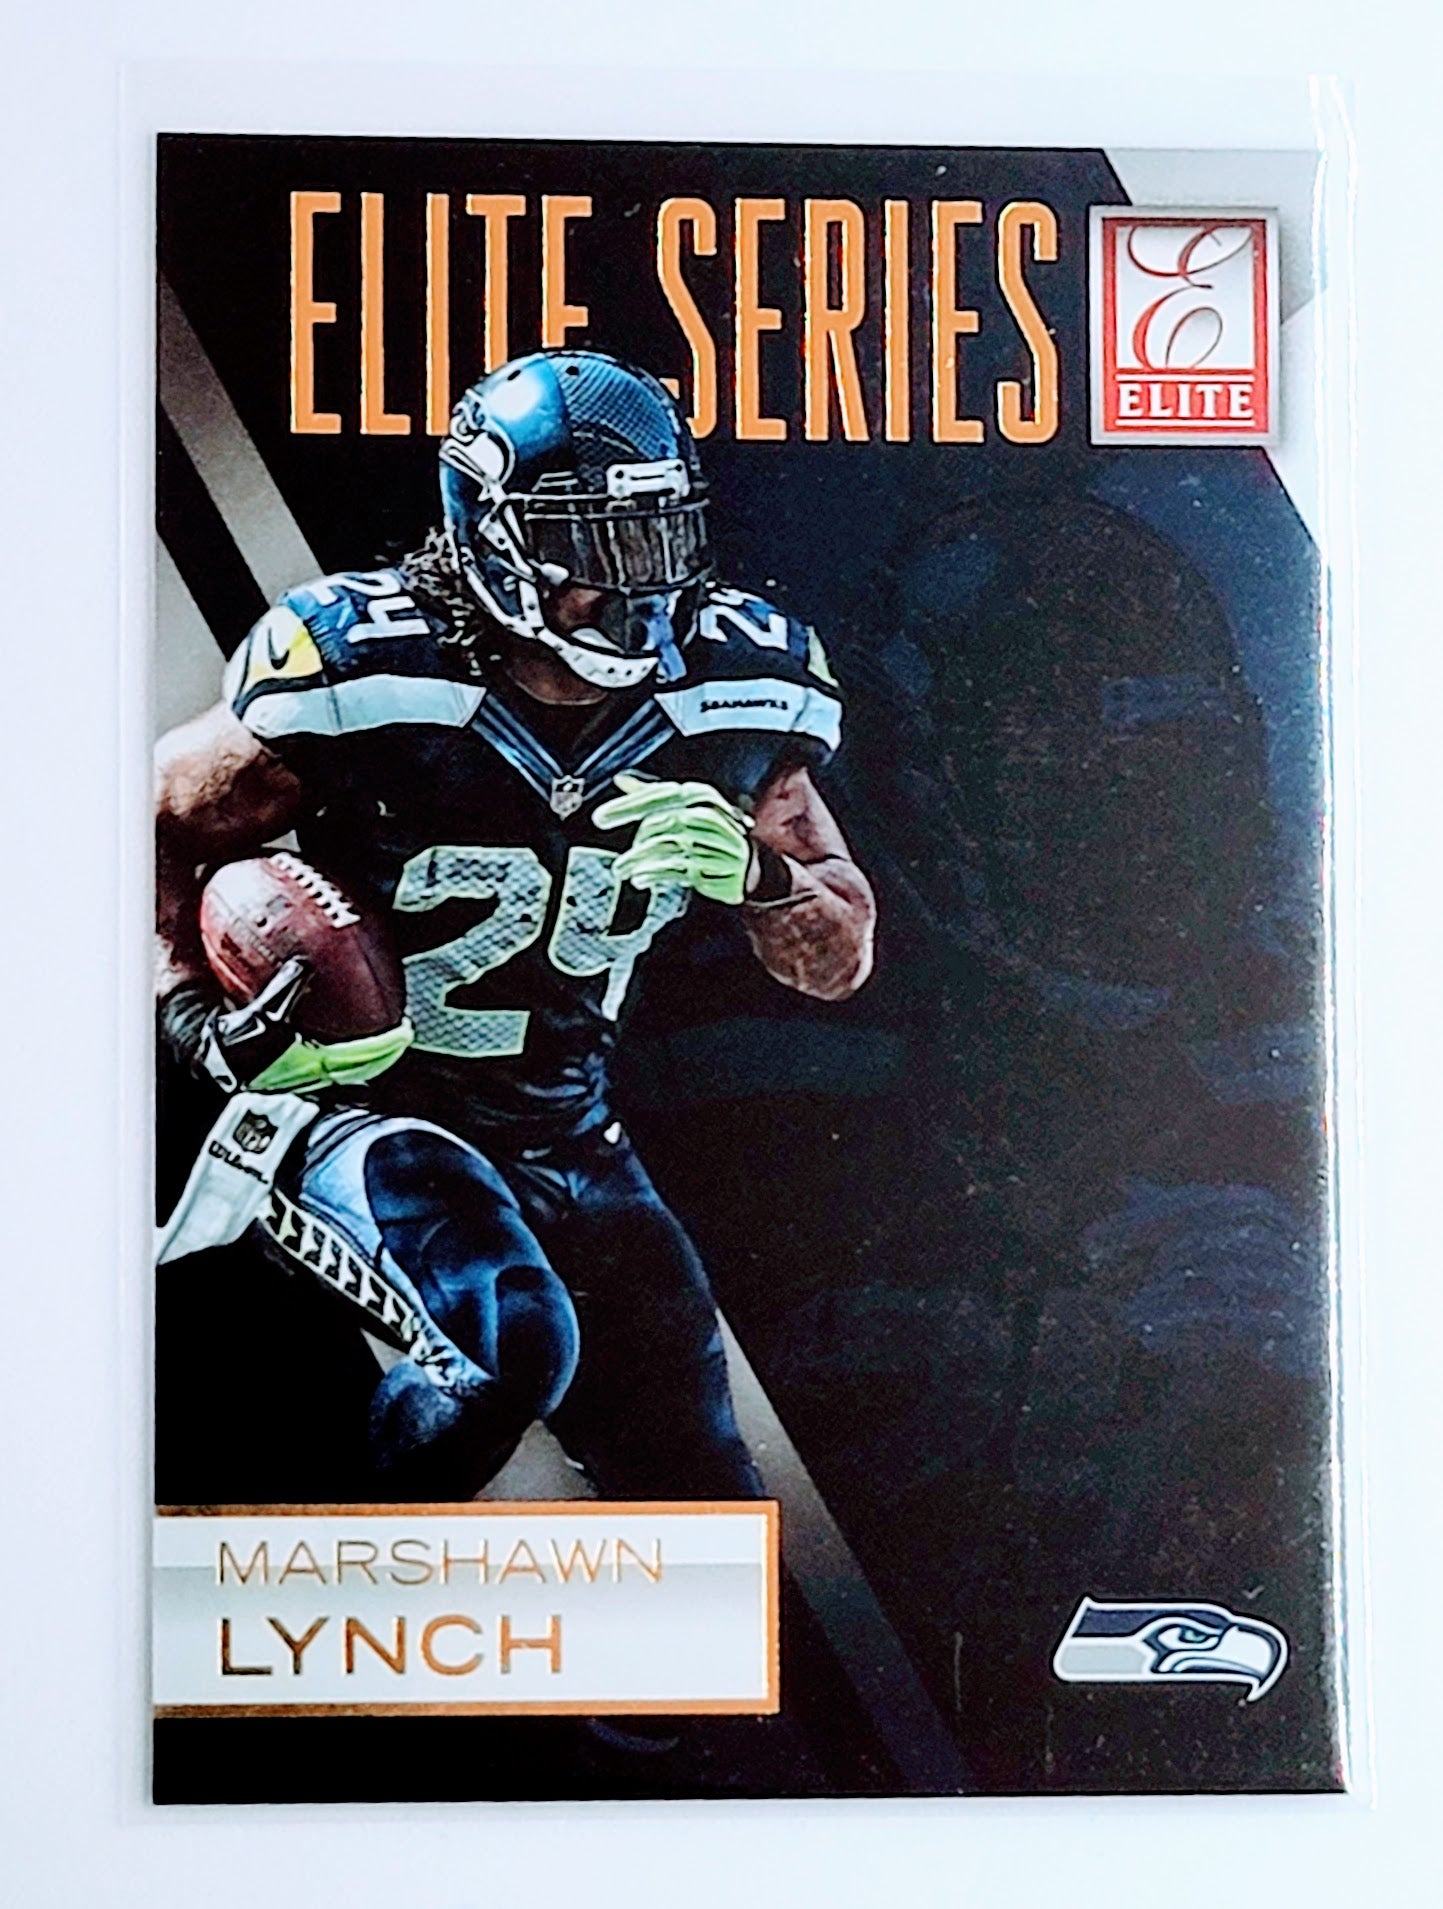 2015 Donruss Marshawn Lynch
Elite Series Football Card  TH13C simple Xclusive Collectibles   